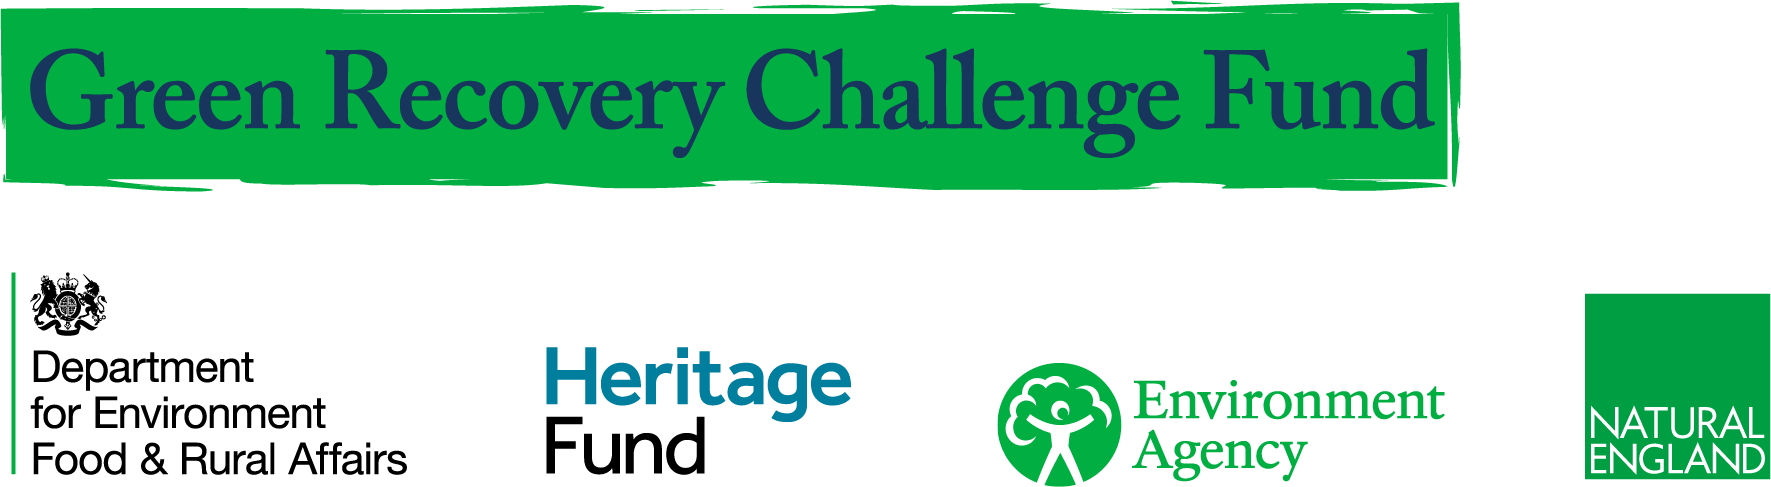 Green recovery challenge fund logo